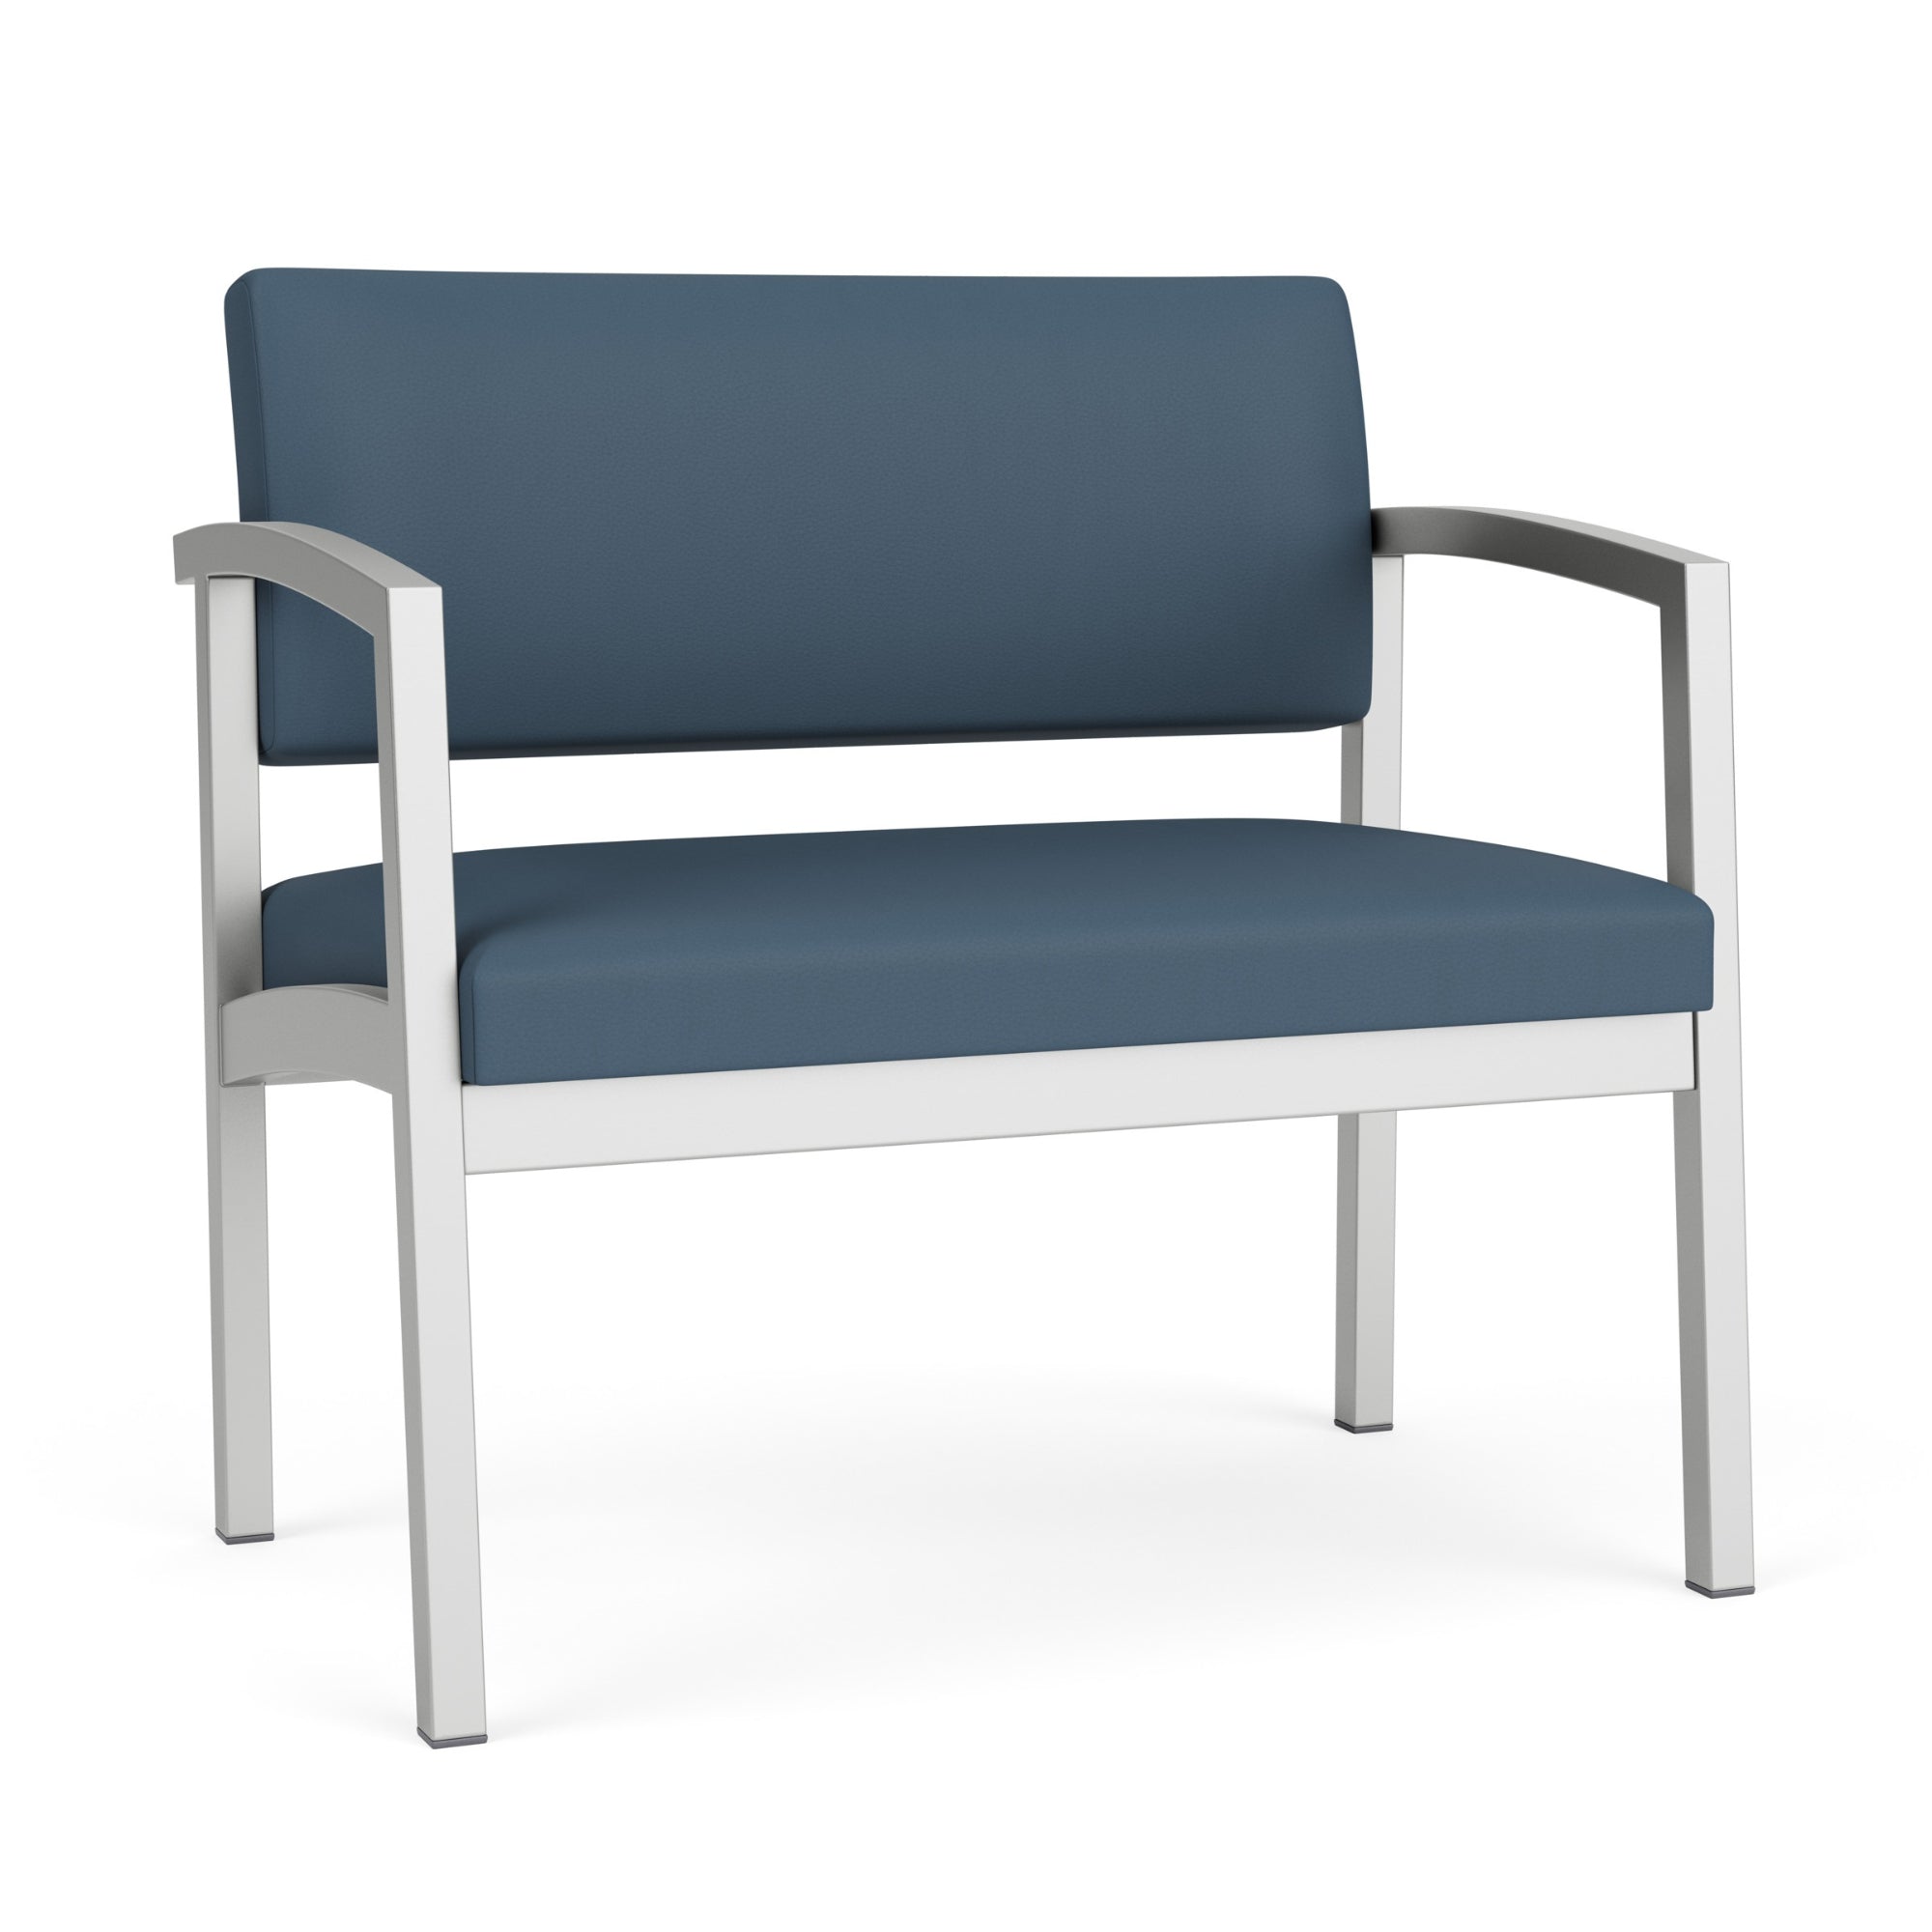 Lenox Steel Collection Reception Seating, Bariatric Chair, 750 lb. Capacity, Healthcare Vinyl Upholstery, FREE SHIPPING